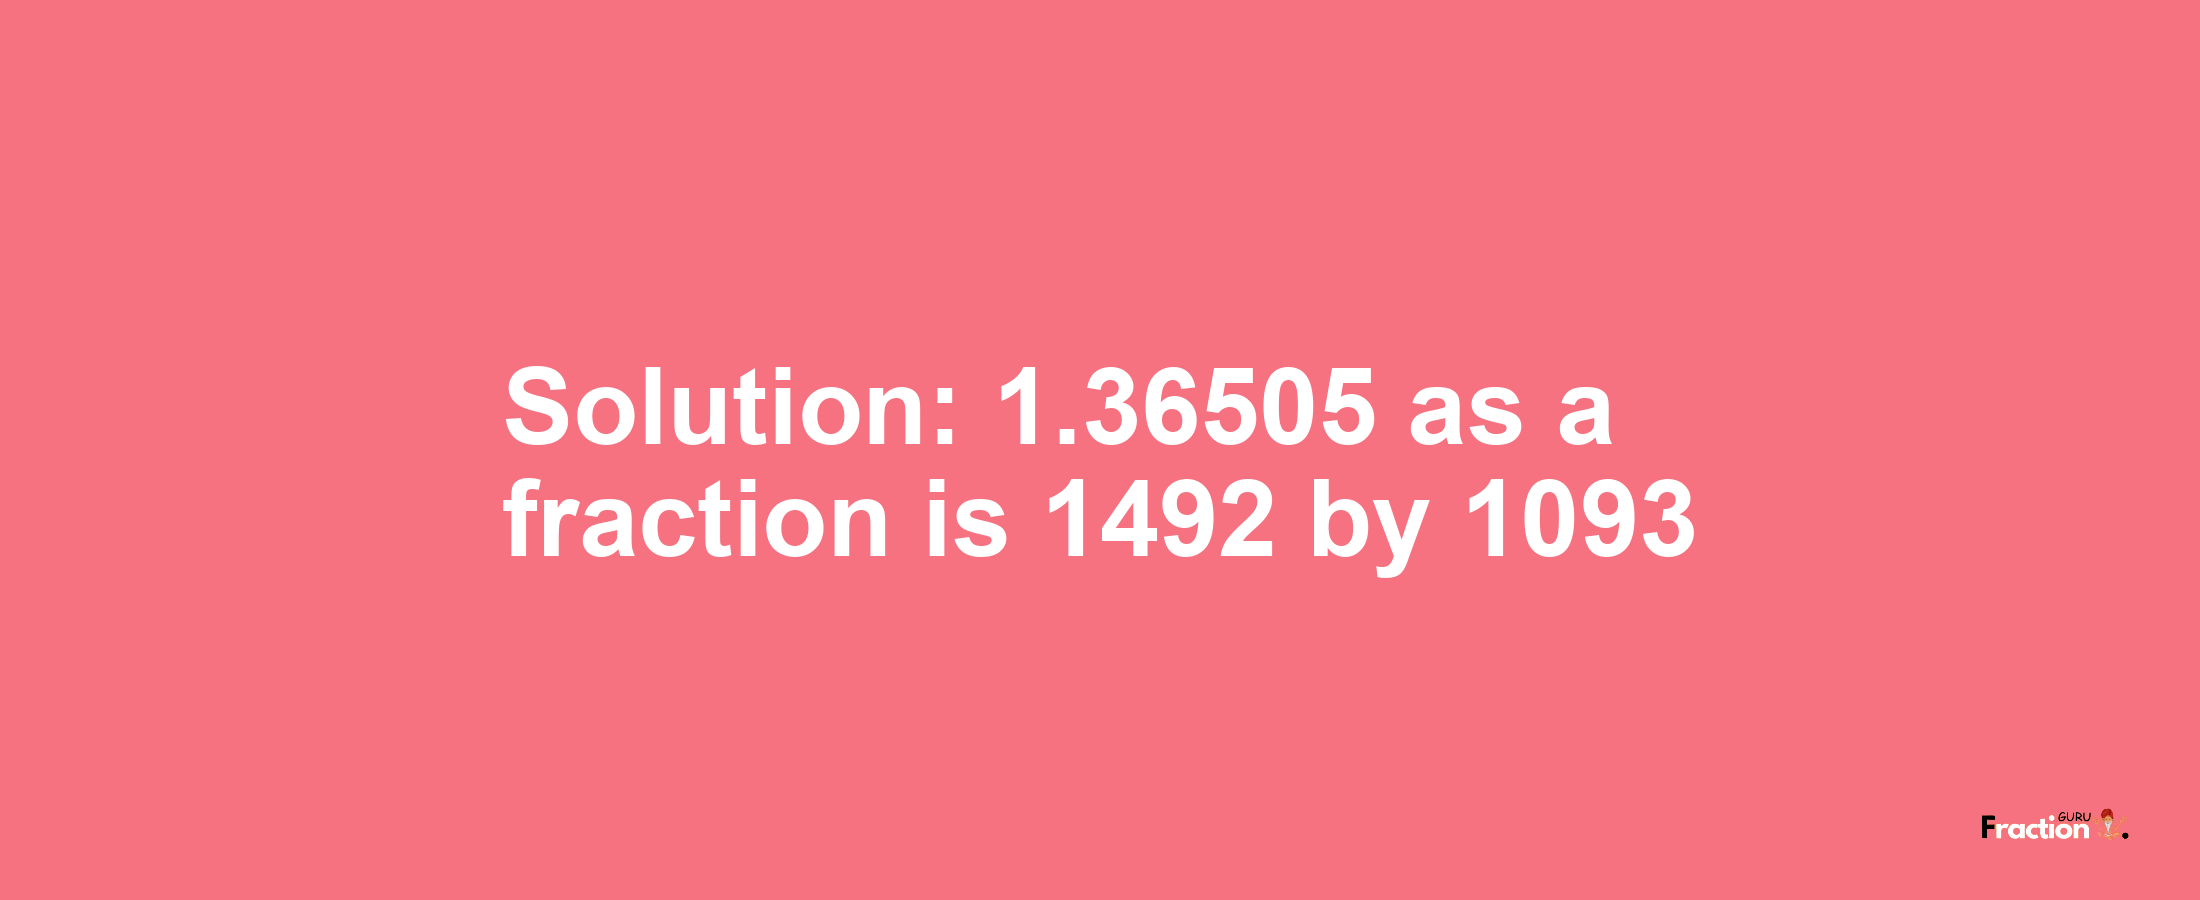 Solution:1.36505 as a fraction is 1492/1093